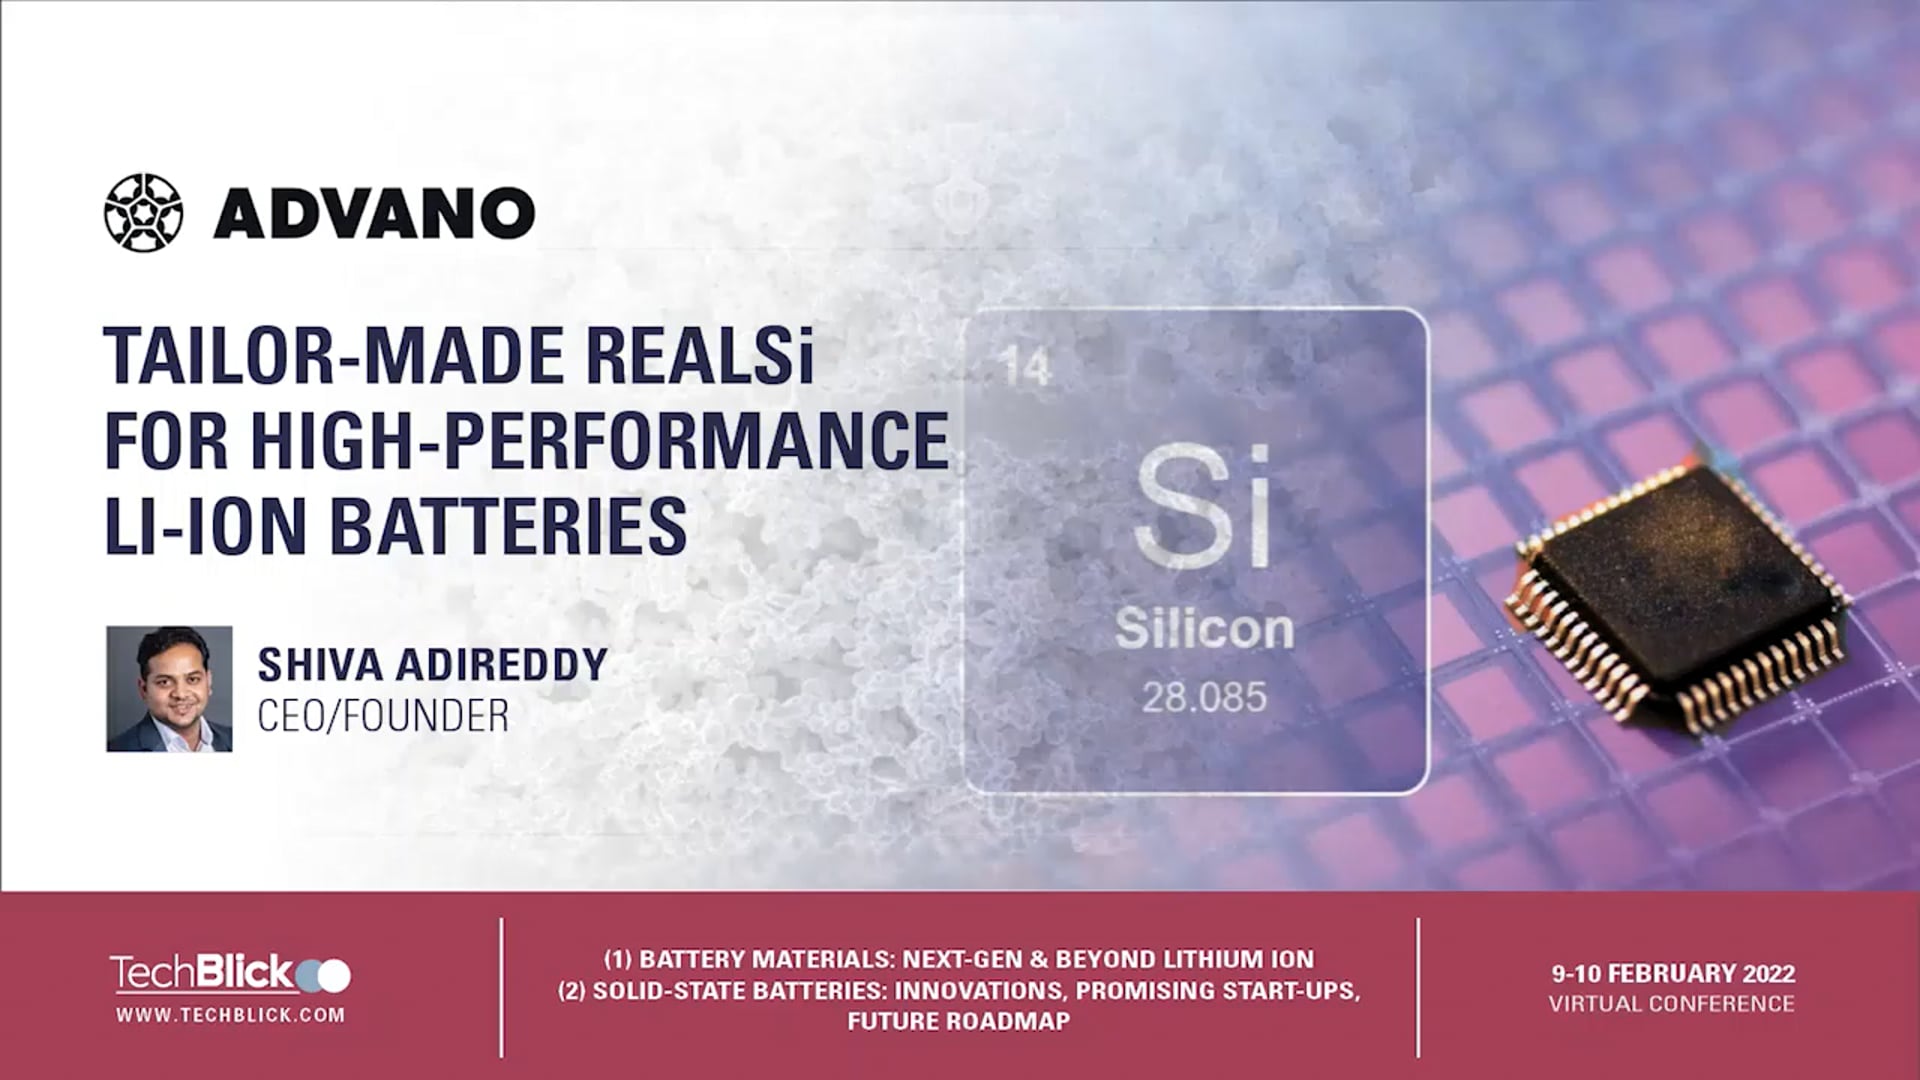 Advano - Tailor-made REALSi for high-performance Li-ion batteries